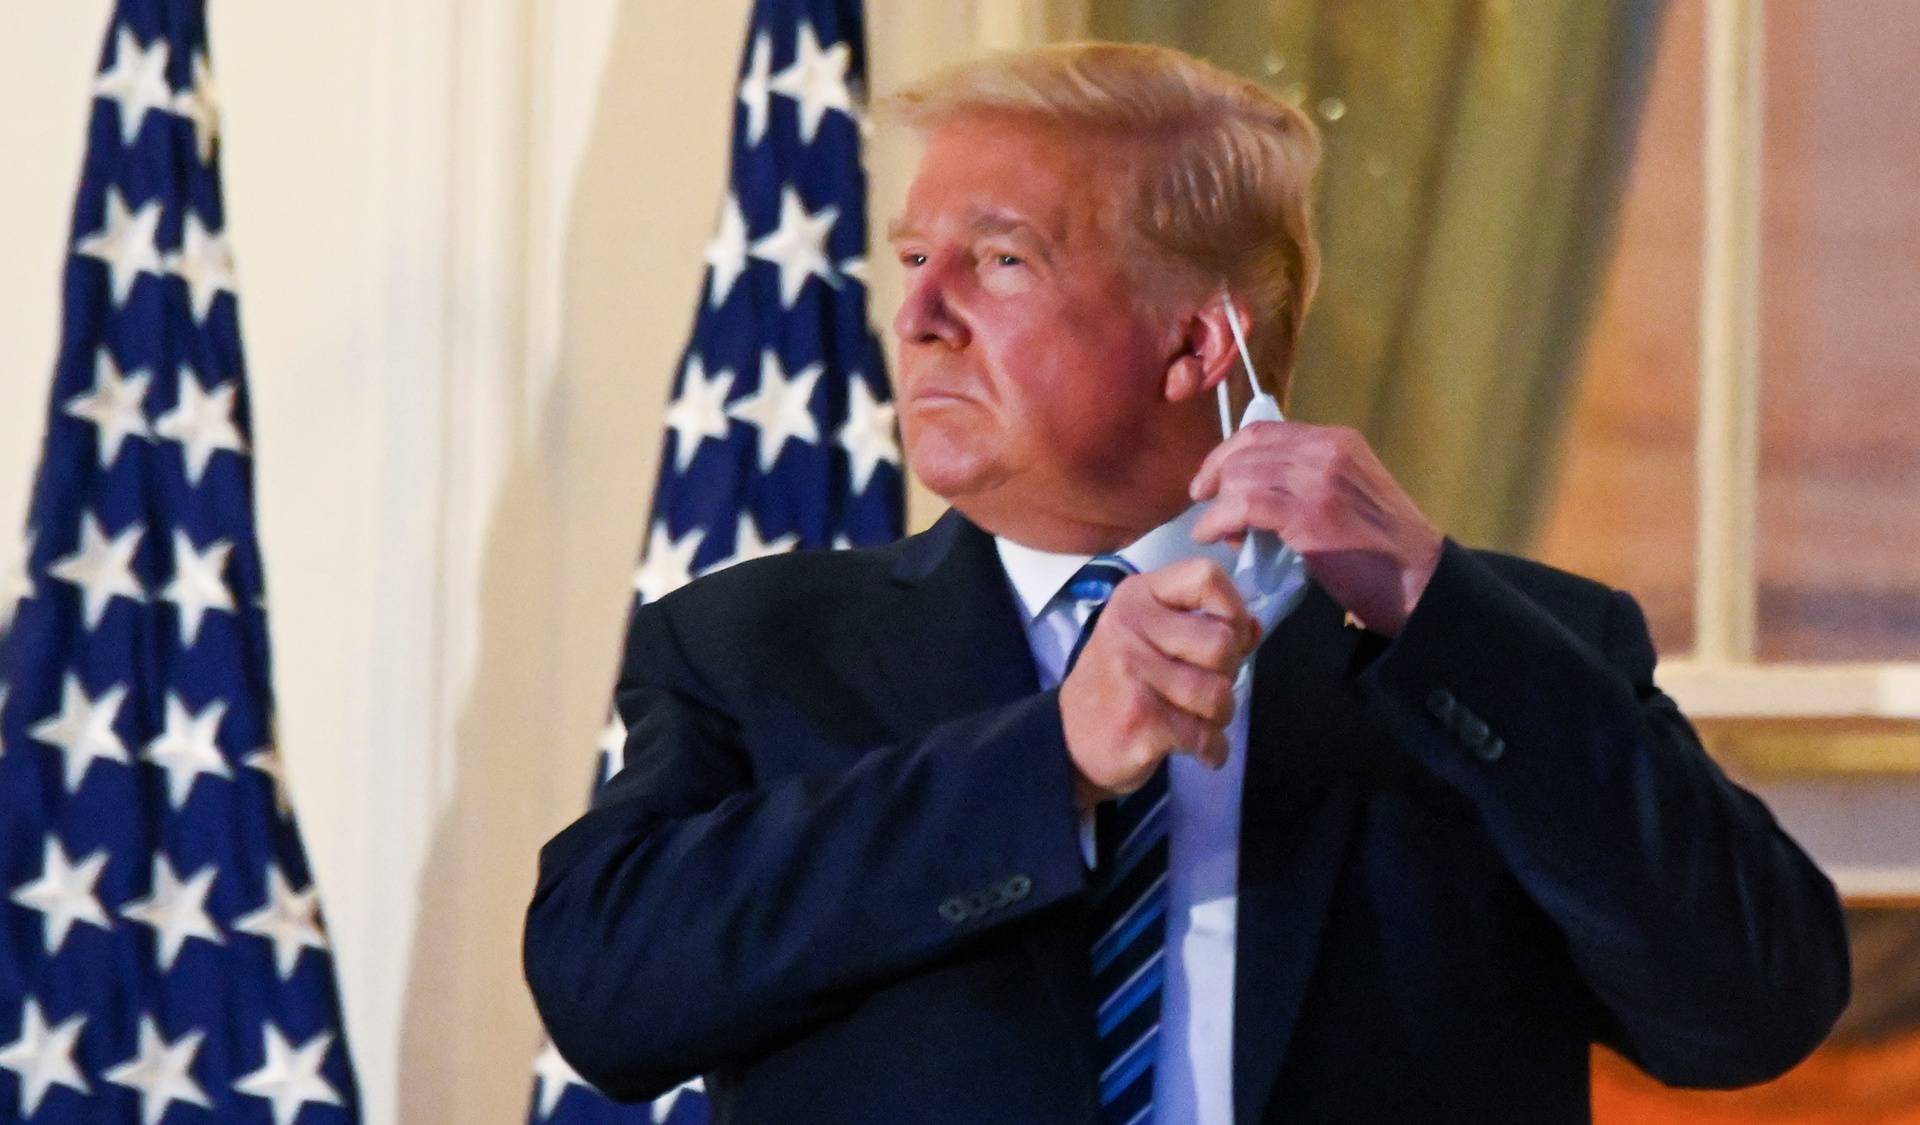 U.S. President Donald Trump pulls off his face mask as he returns to the White House after being hospitalized at Walter Reed Medical Center for coronavirus disease (COVID-19), in Washington